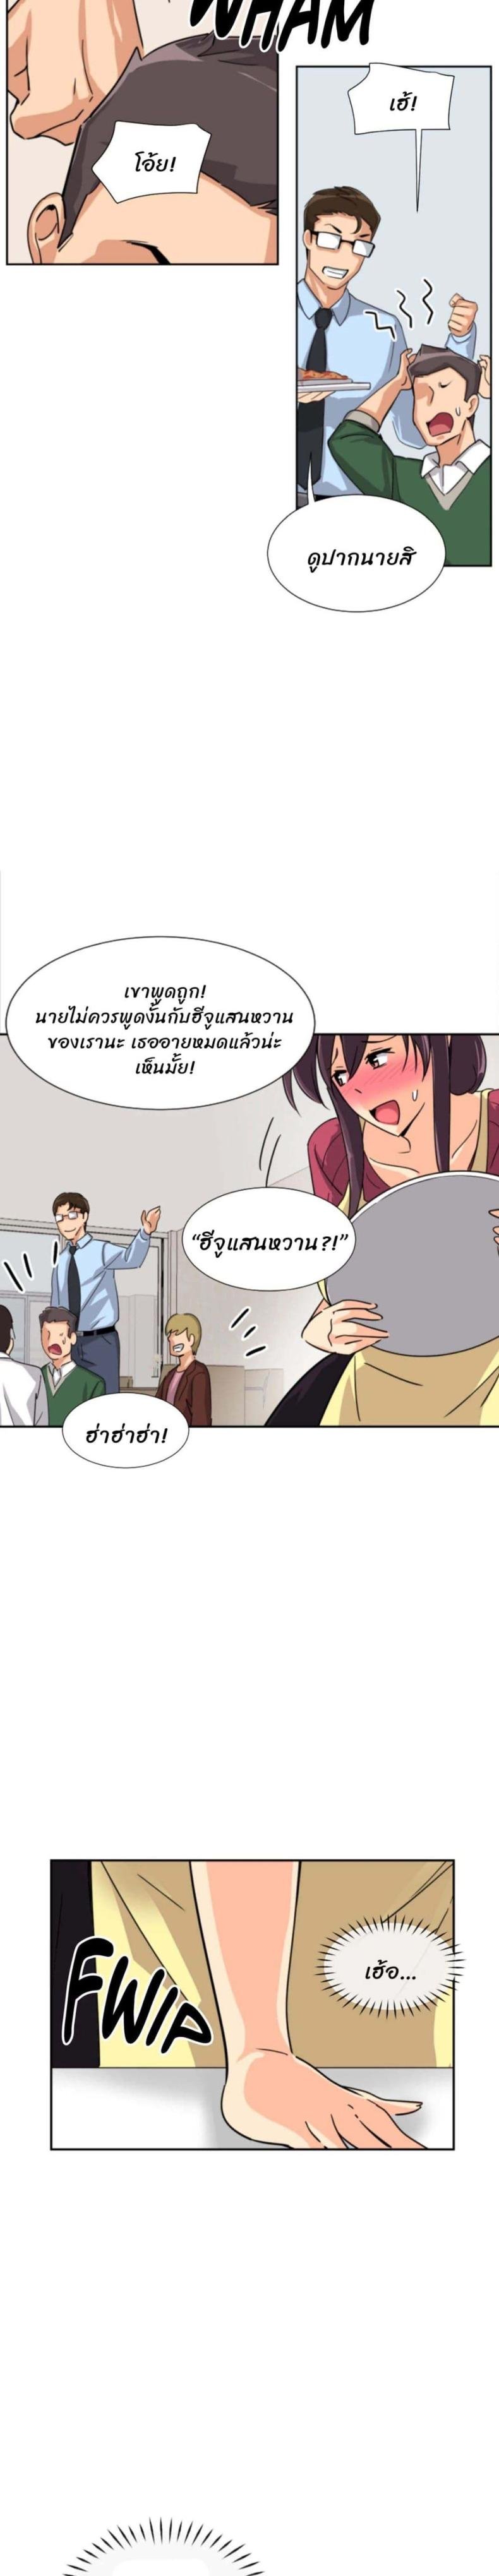 How to Train Your Wife 32 ภาพที่ 8